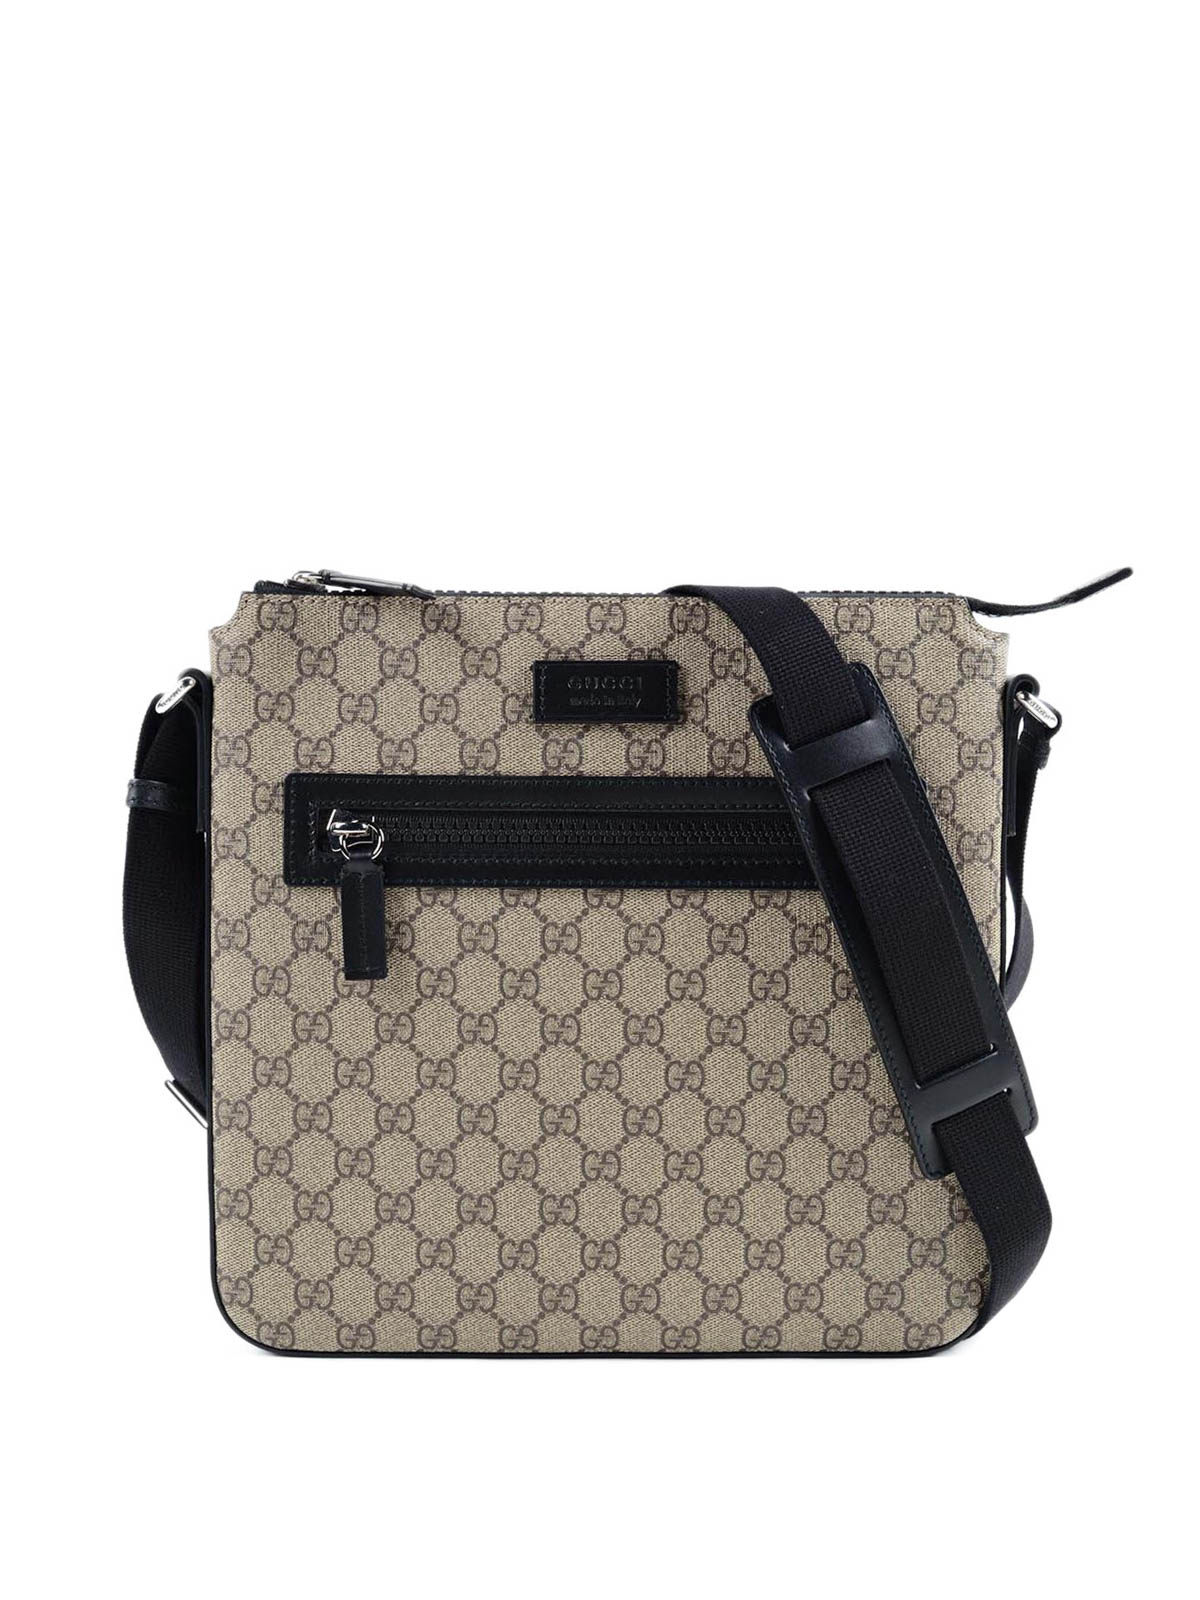 GG Supreme crossbody by Gucci - cross body bags | Shop online at www.bagssaleusa.com/product-category/shoes/